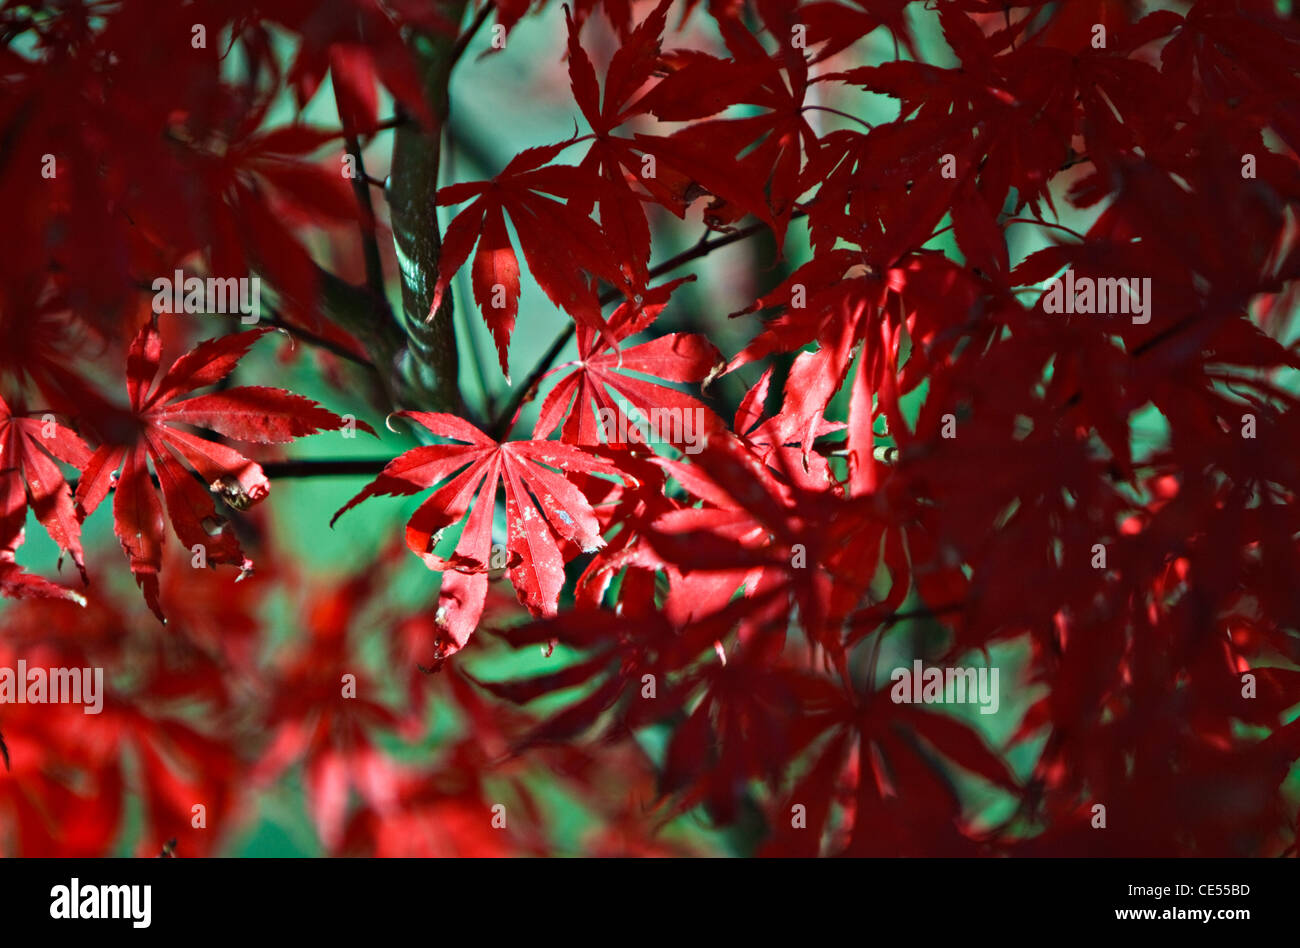 Red Leaf Japanese Acer Tree Stock Photo